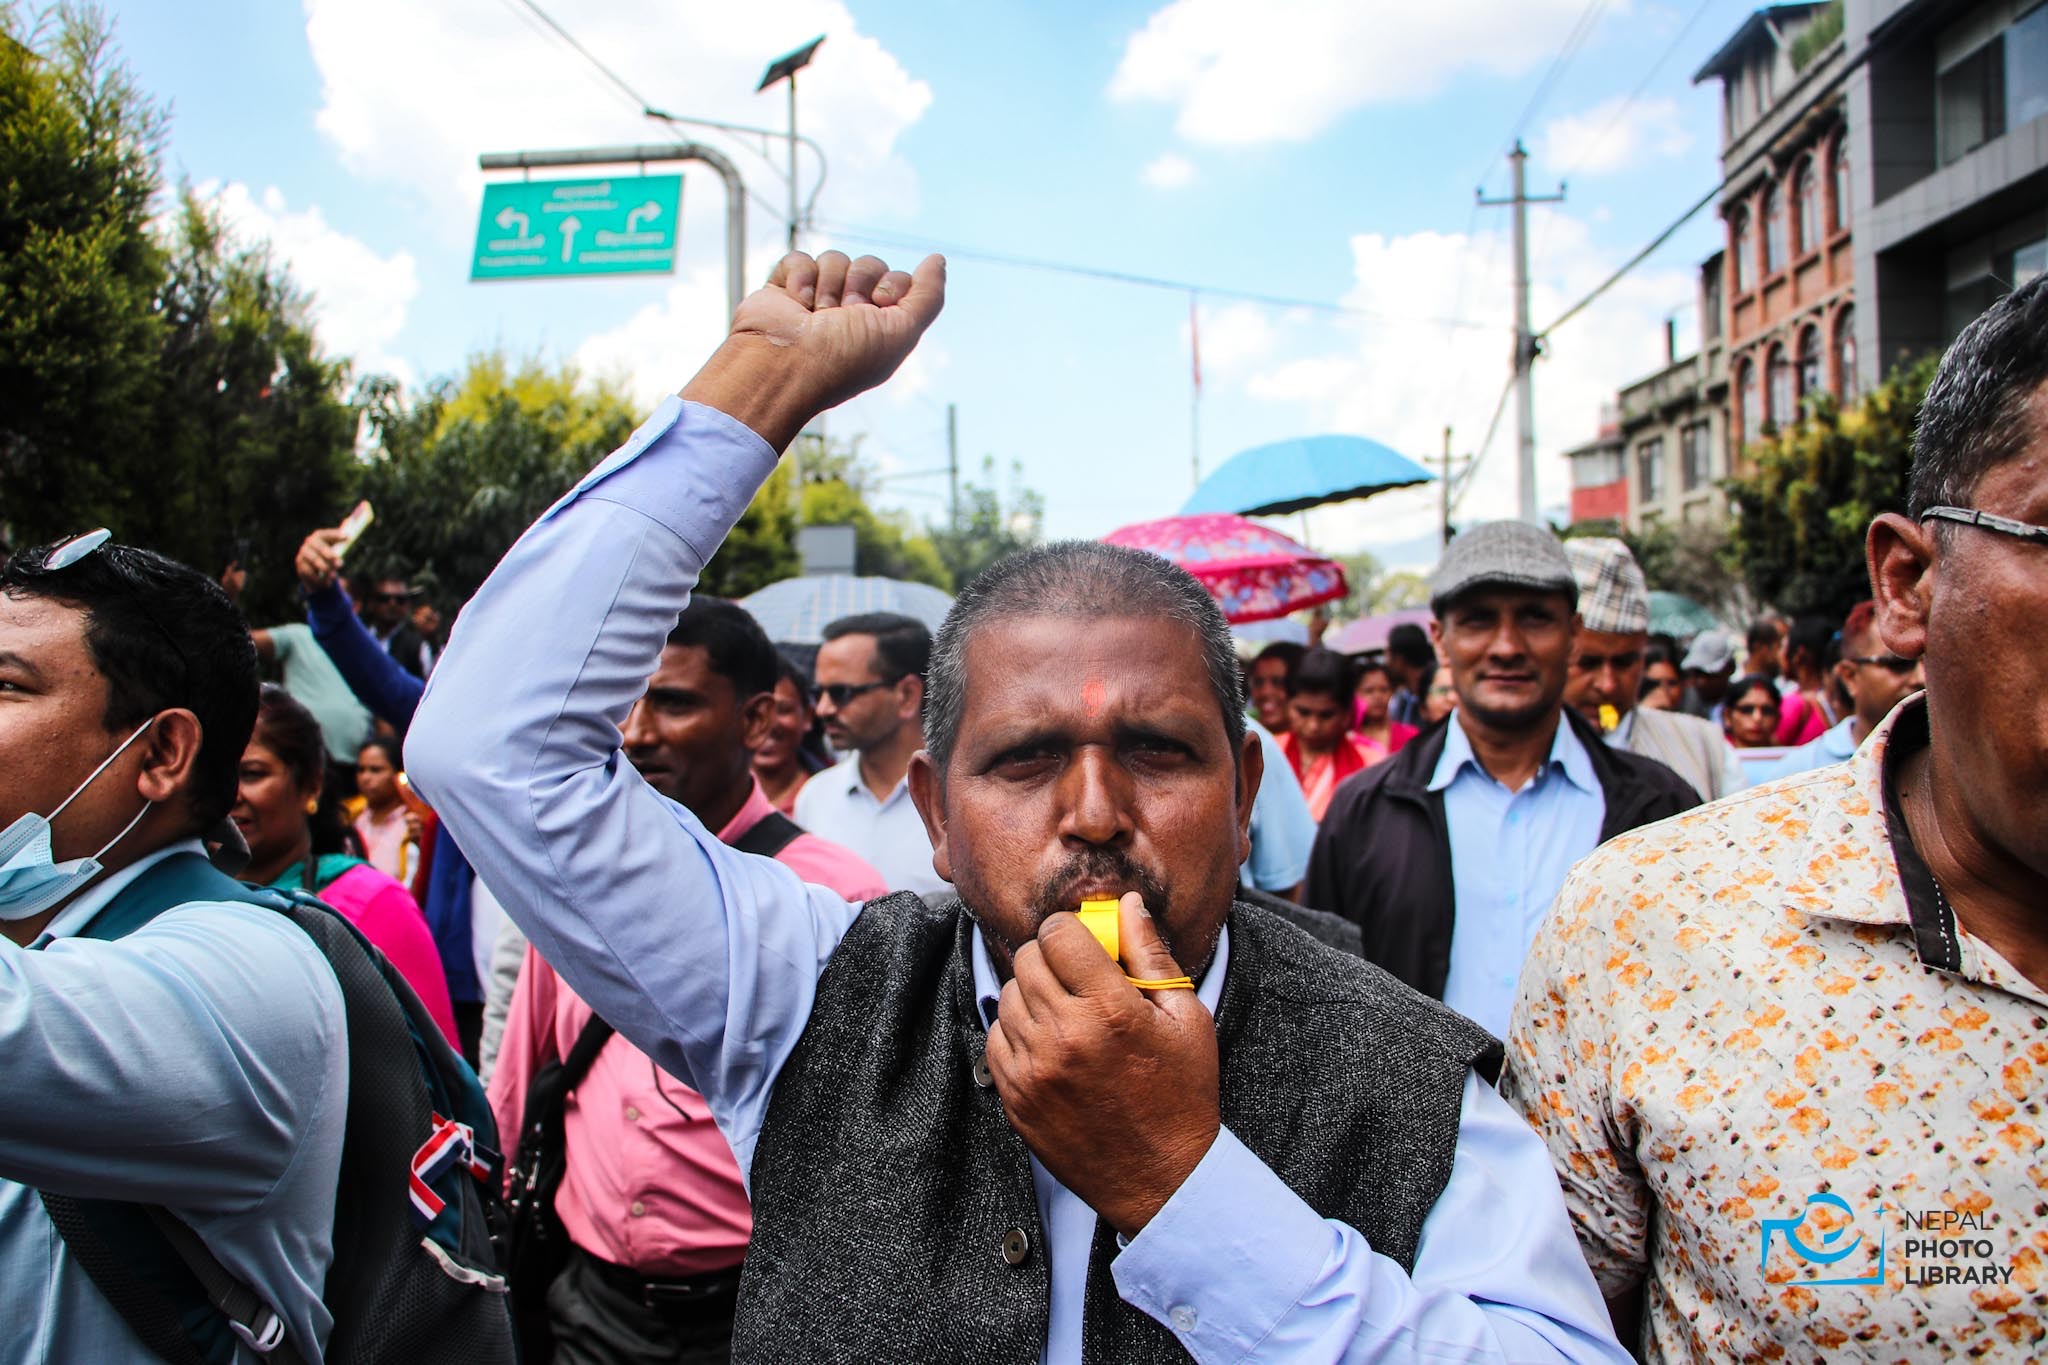 Relief teachers’ demonstrations continue with whistleblowing (photos)